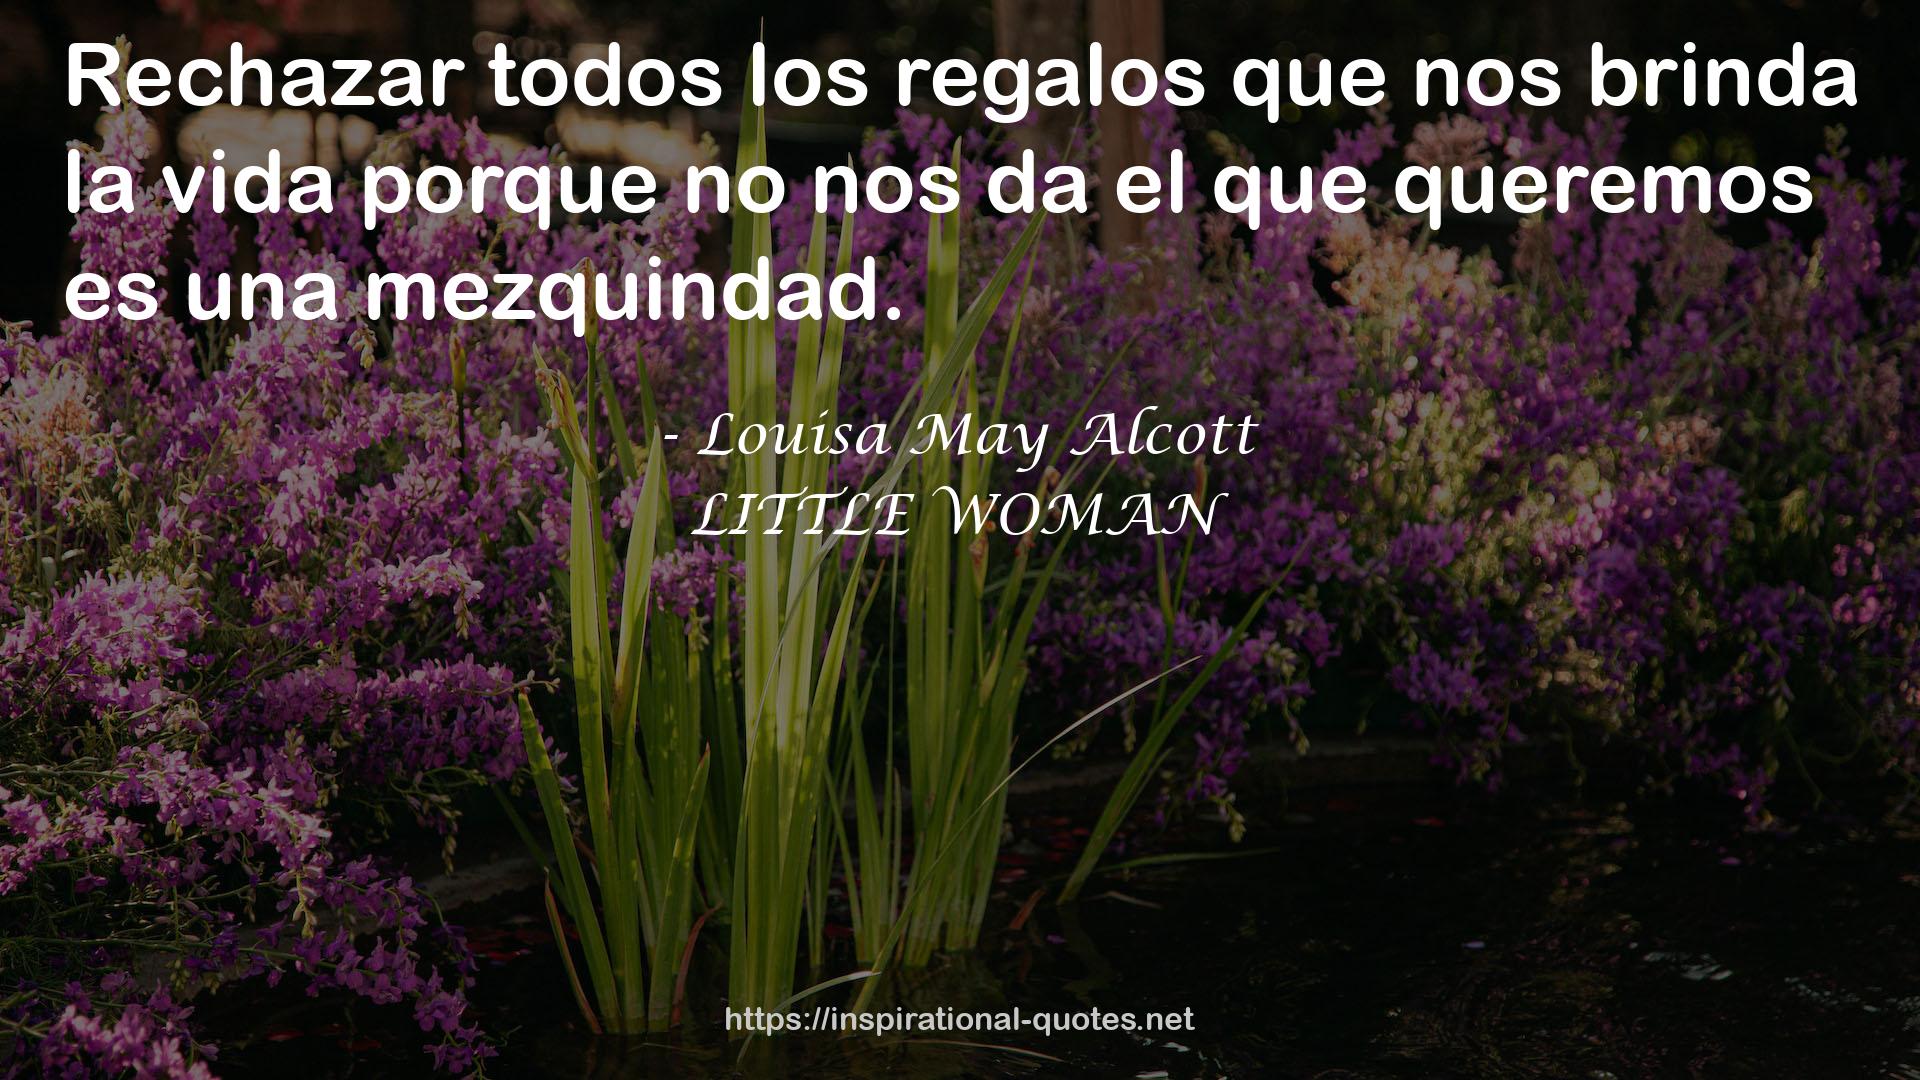 LITTLE WOMAN QUOTES